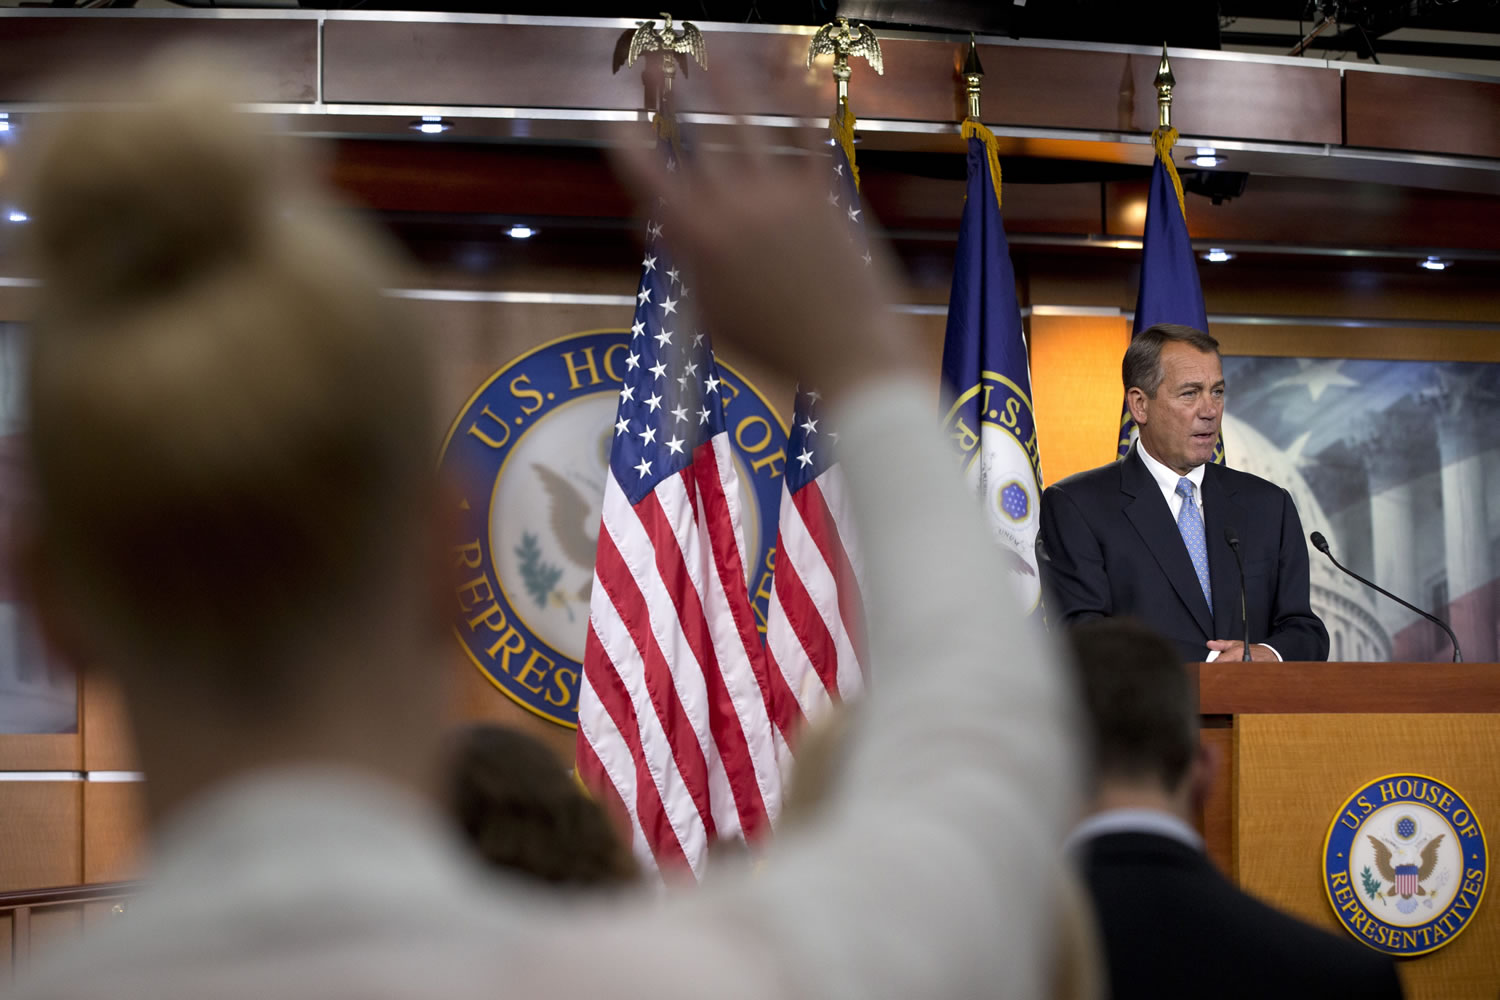 A reporter raises her hand to ask a question of House Speaker John Boehner of Ohio during a news conference on Capitol Hill in Washington on Thursday.